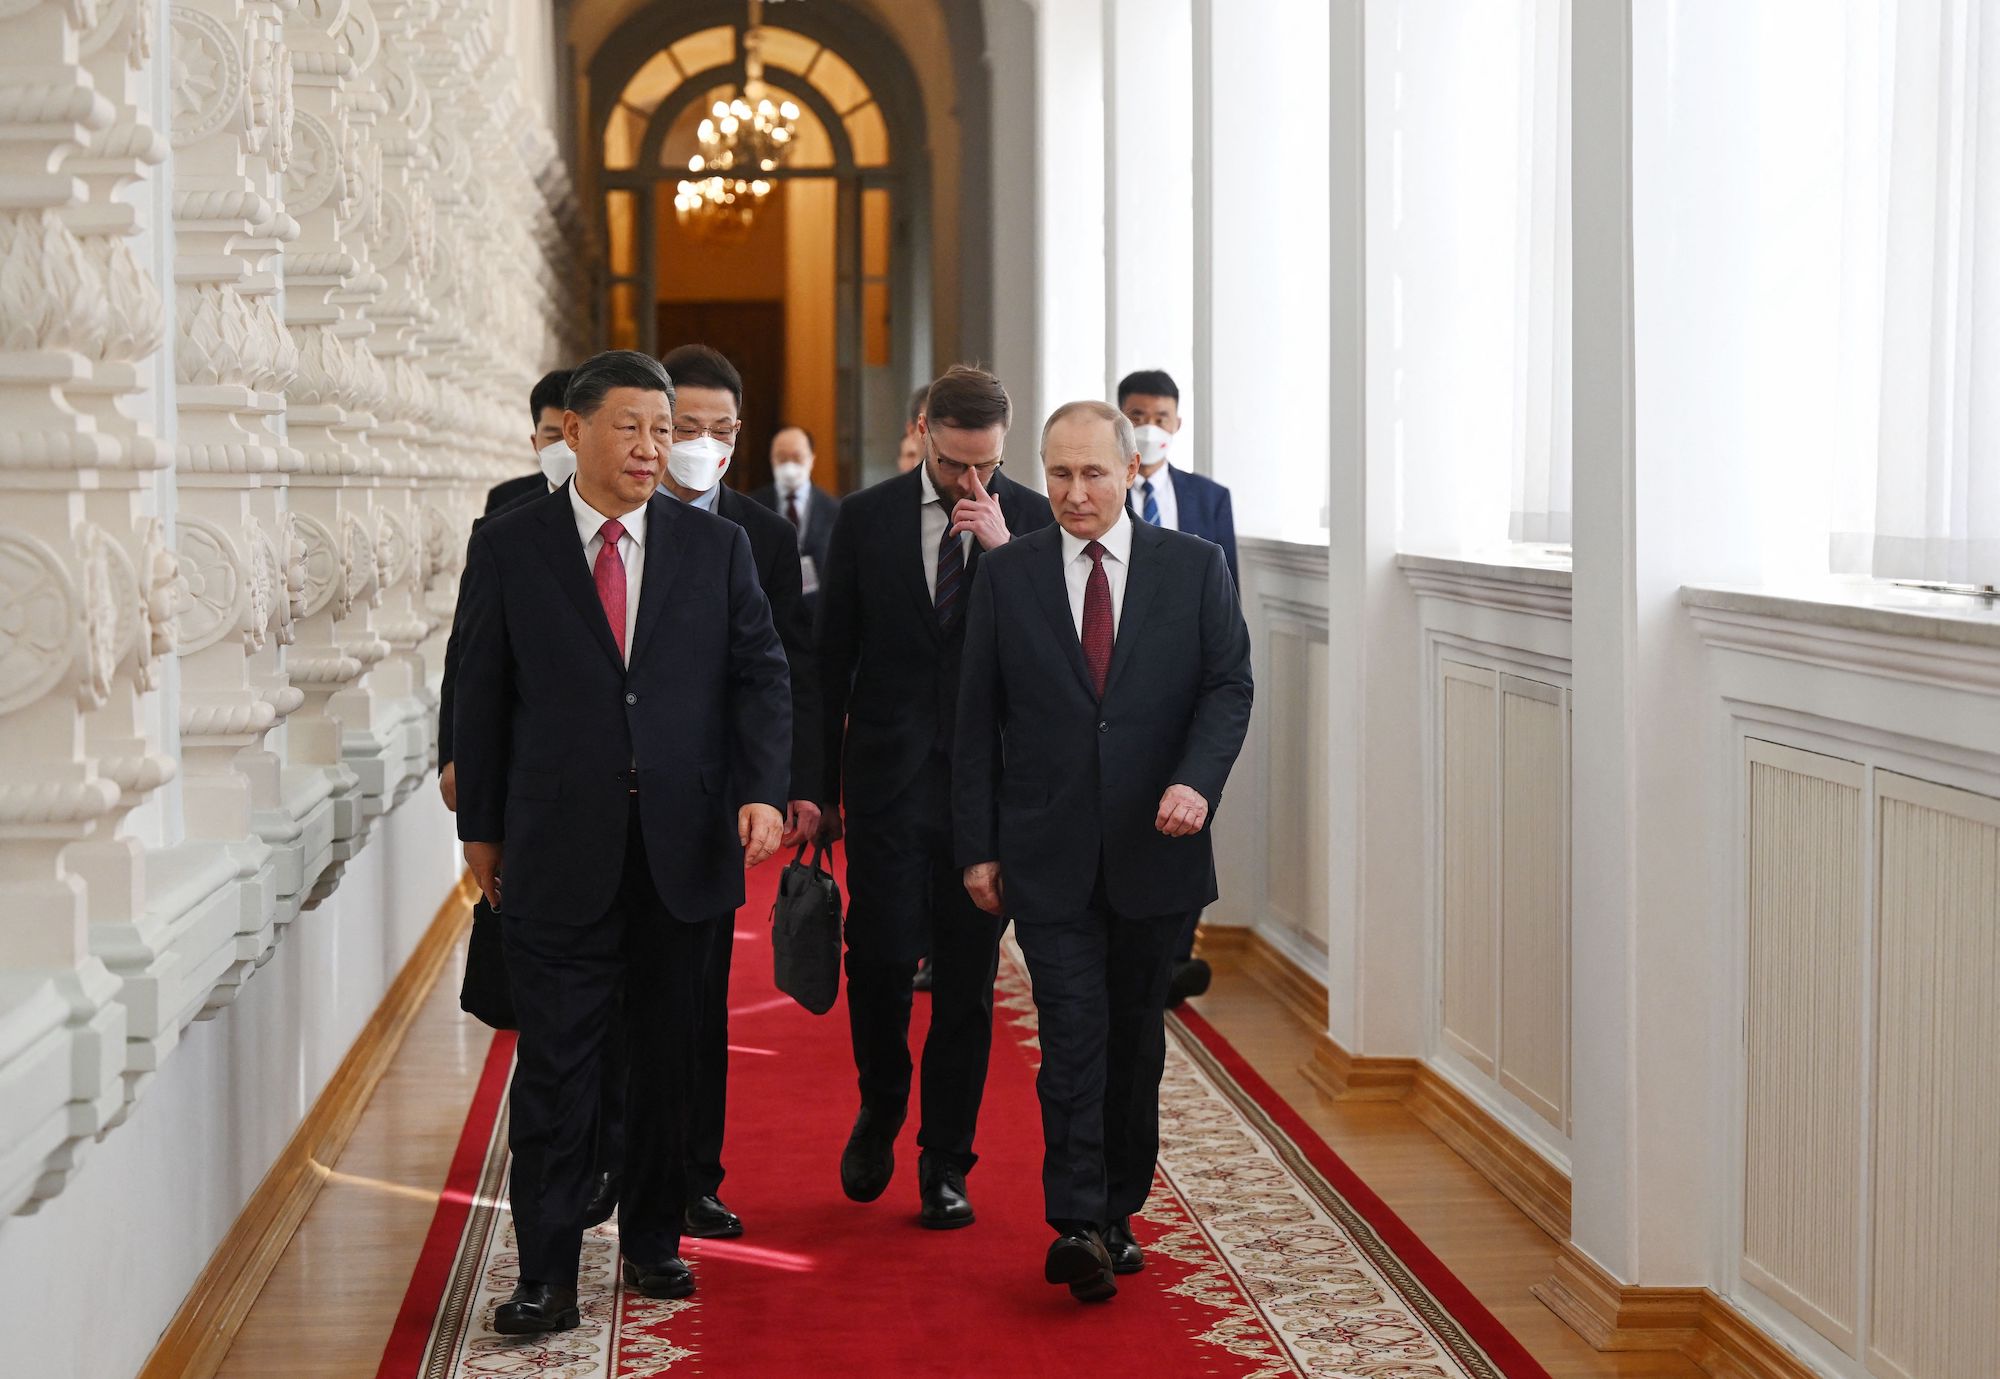 Russian President Vladimir Putin meets with Chinese leader Xi Jinping at the Kremlin on Tuesday.